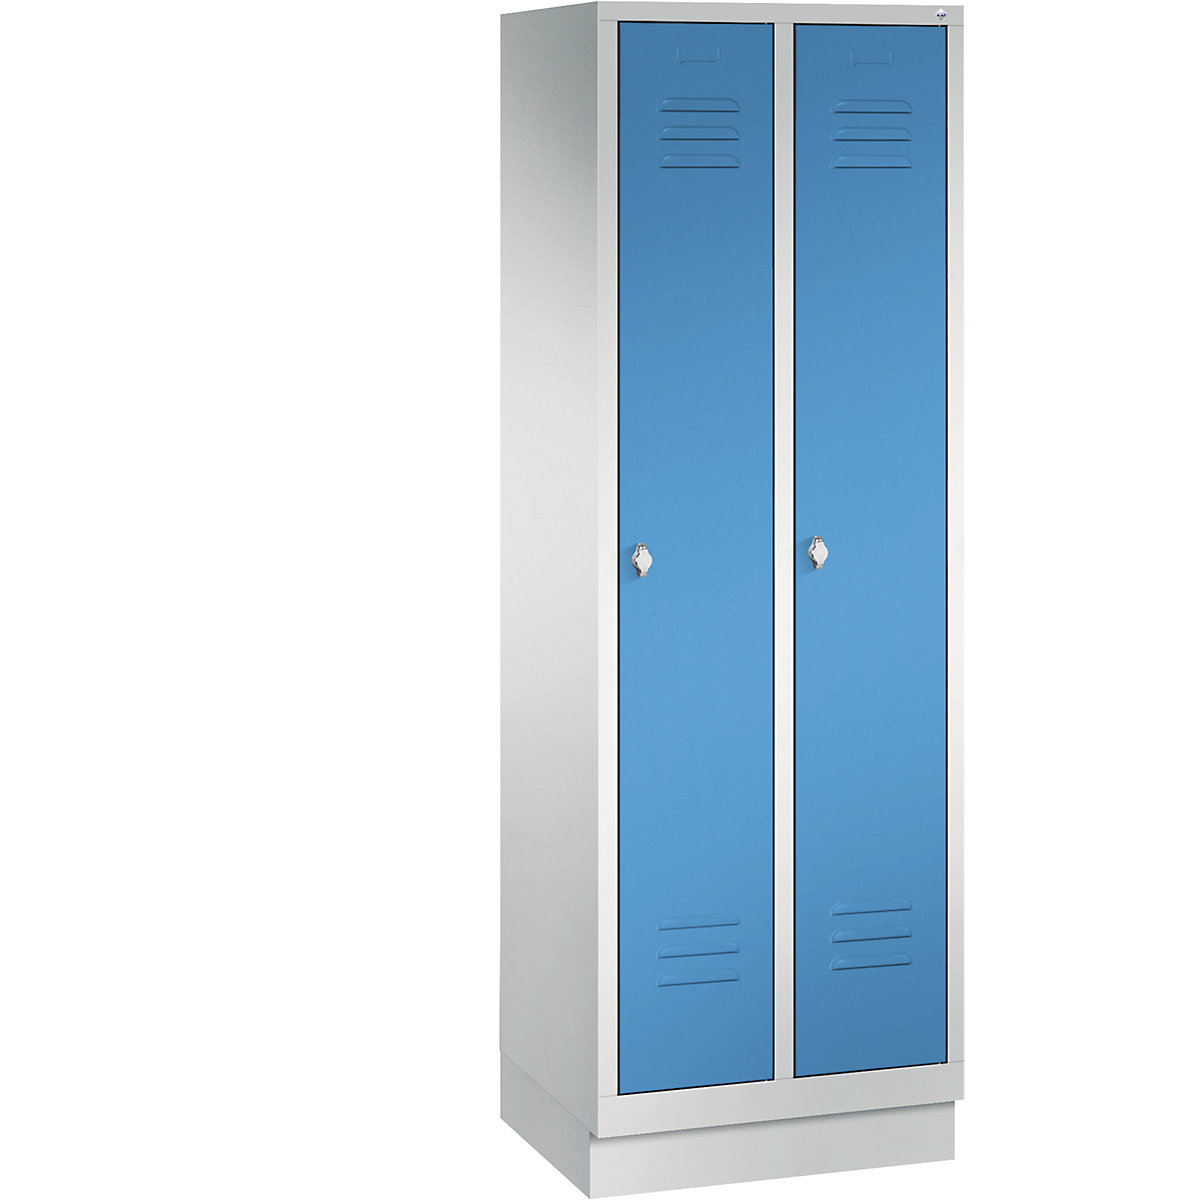 CLASSIC storage cupboard with plinth – C+P, 2 compartments, compartment width 300 mm, light grey / light blue-6